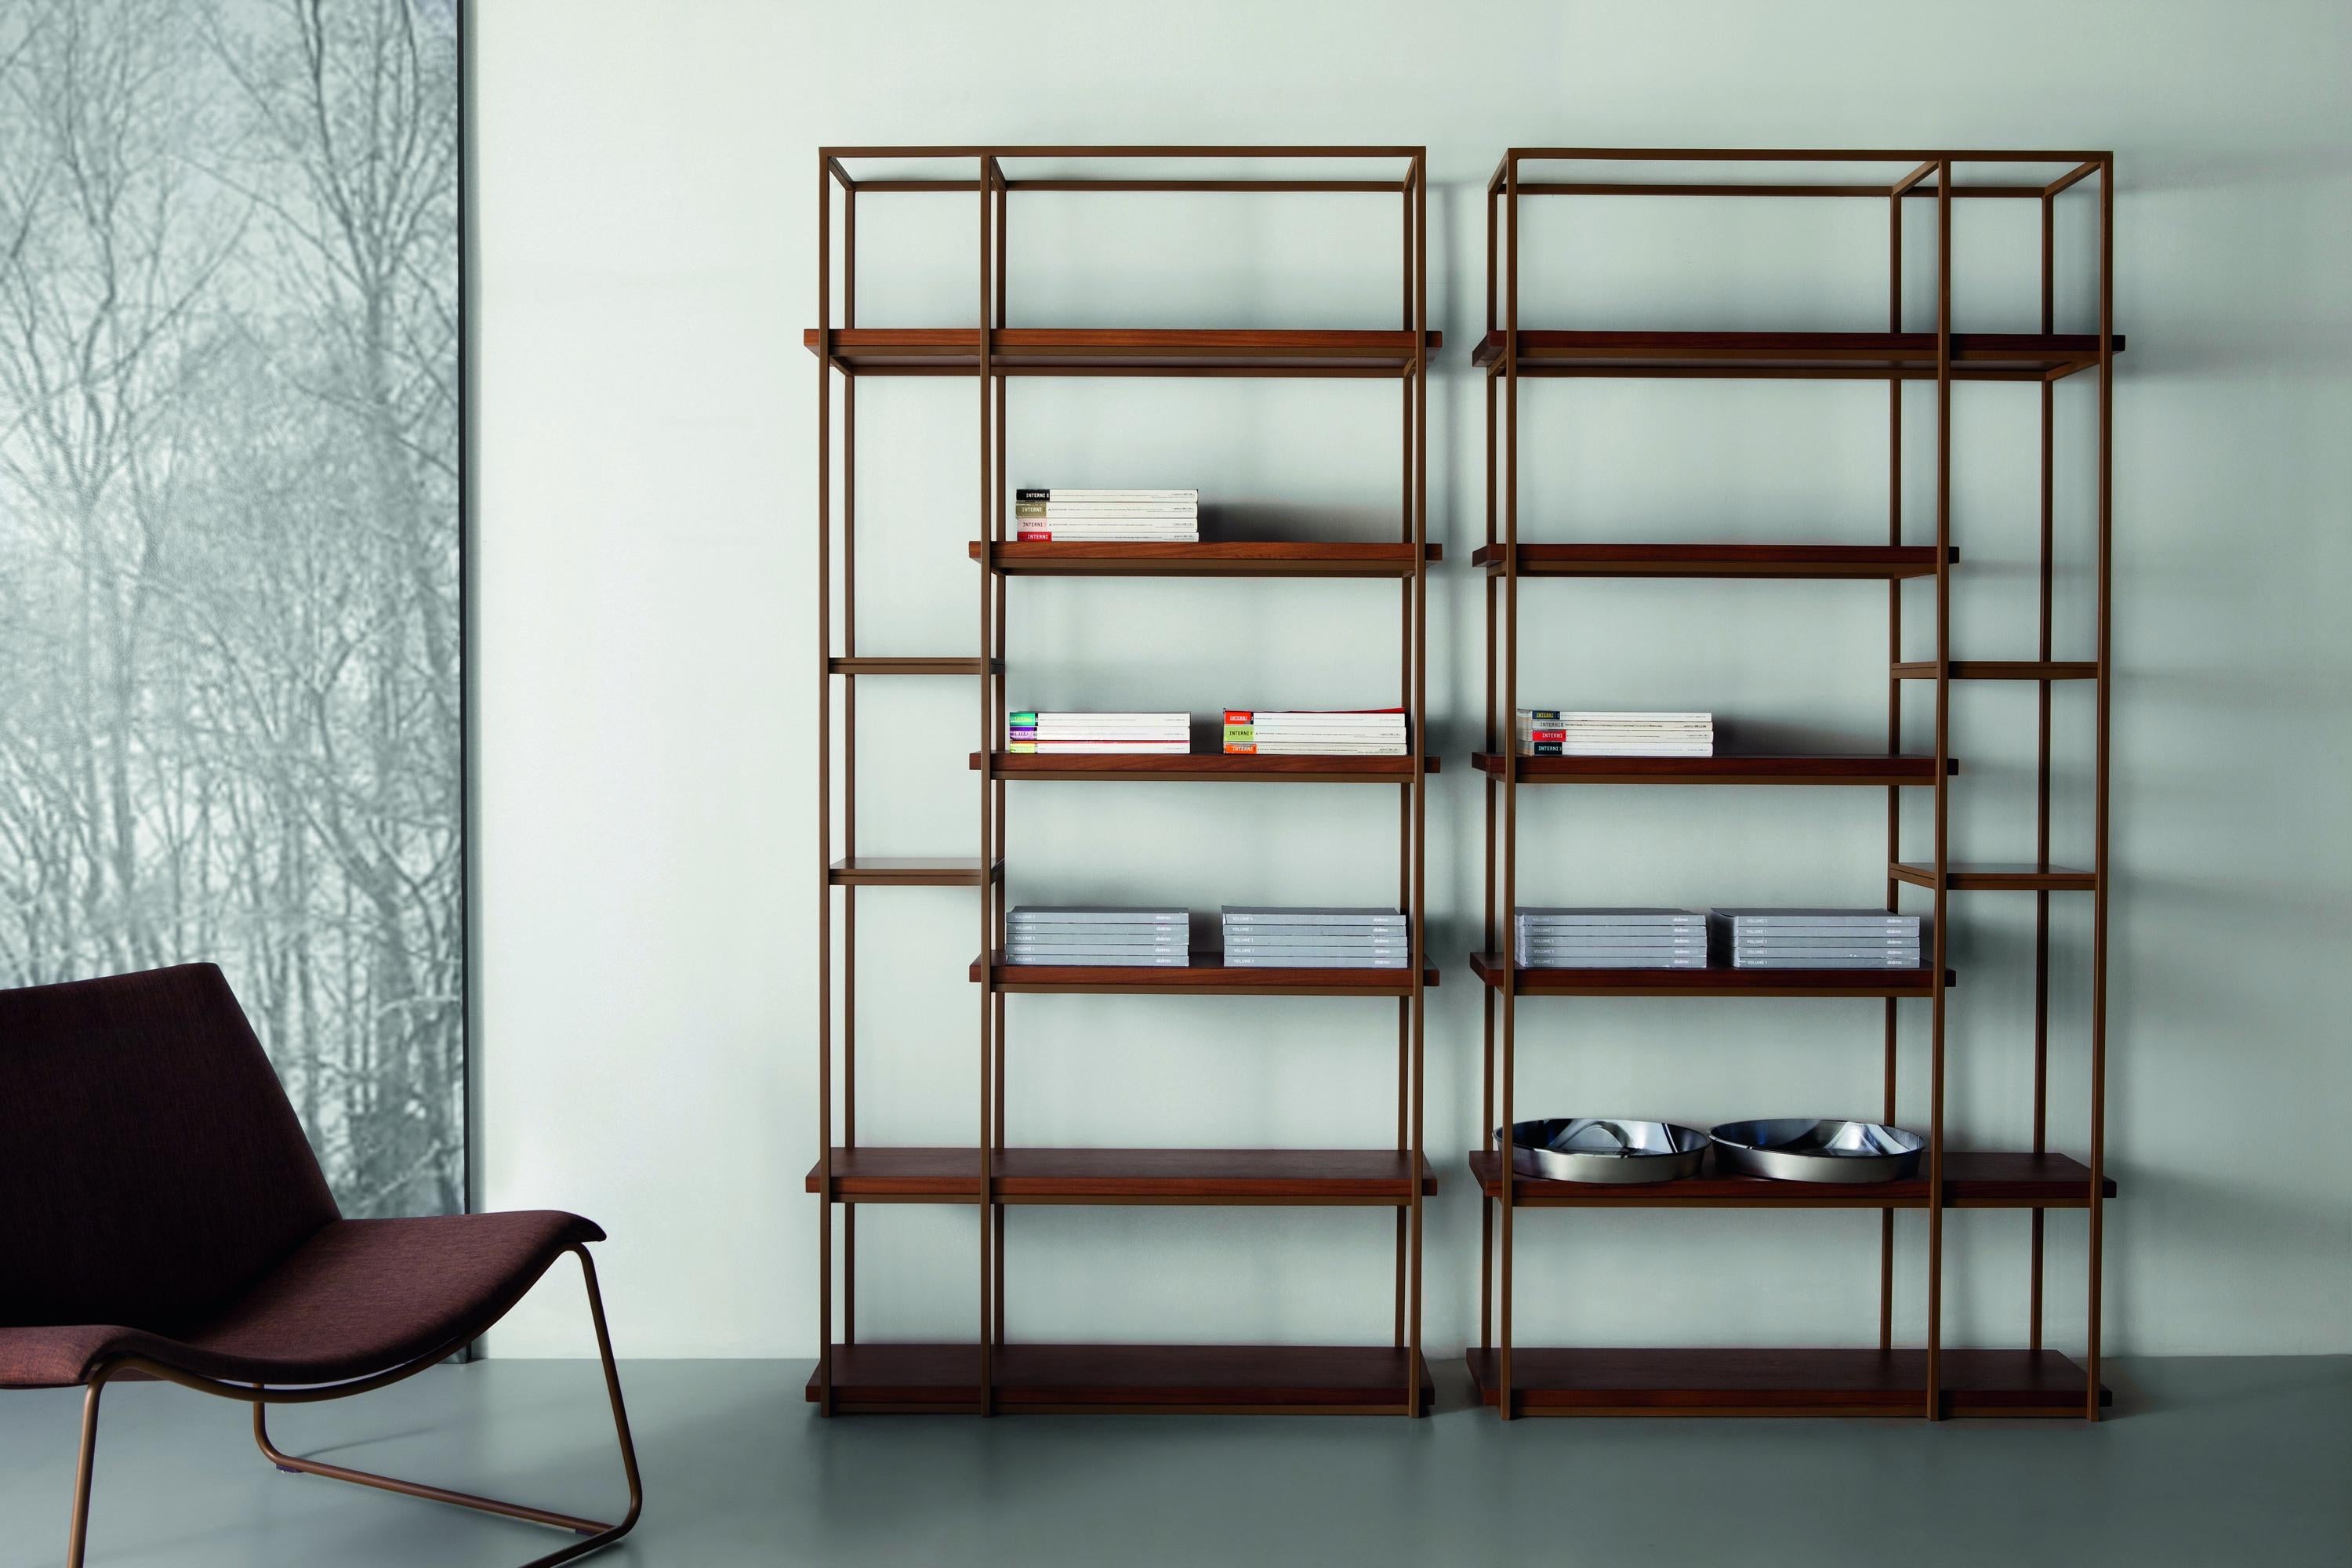 Step Bookcase by Doimo Brasil
Dimensions:  W 100 x D 30 x H 200 cm 
Materials: Structure: Aged steel, Shelf: Veneer or lacquer.
  

With the intention of providing good taste and personality, Doimo deciphers trends and follows the evolution of man